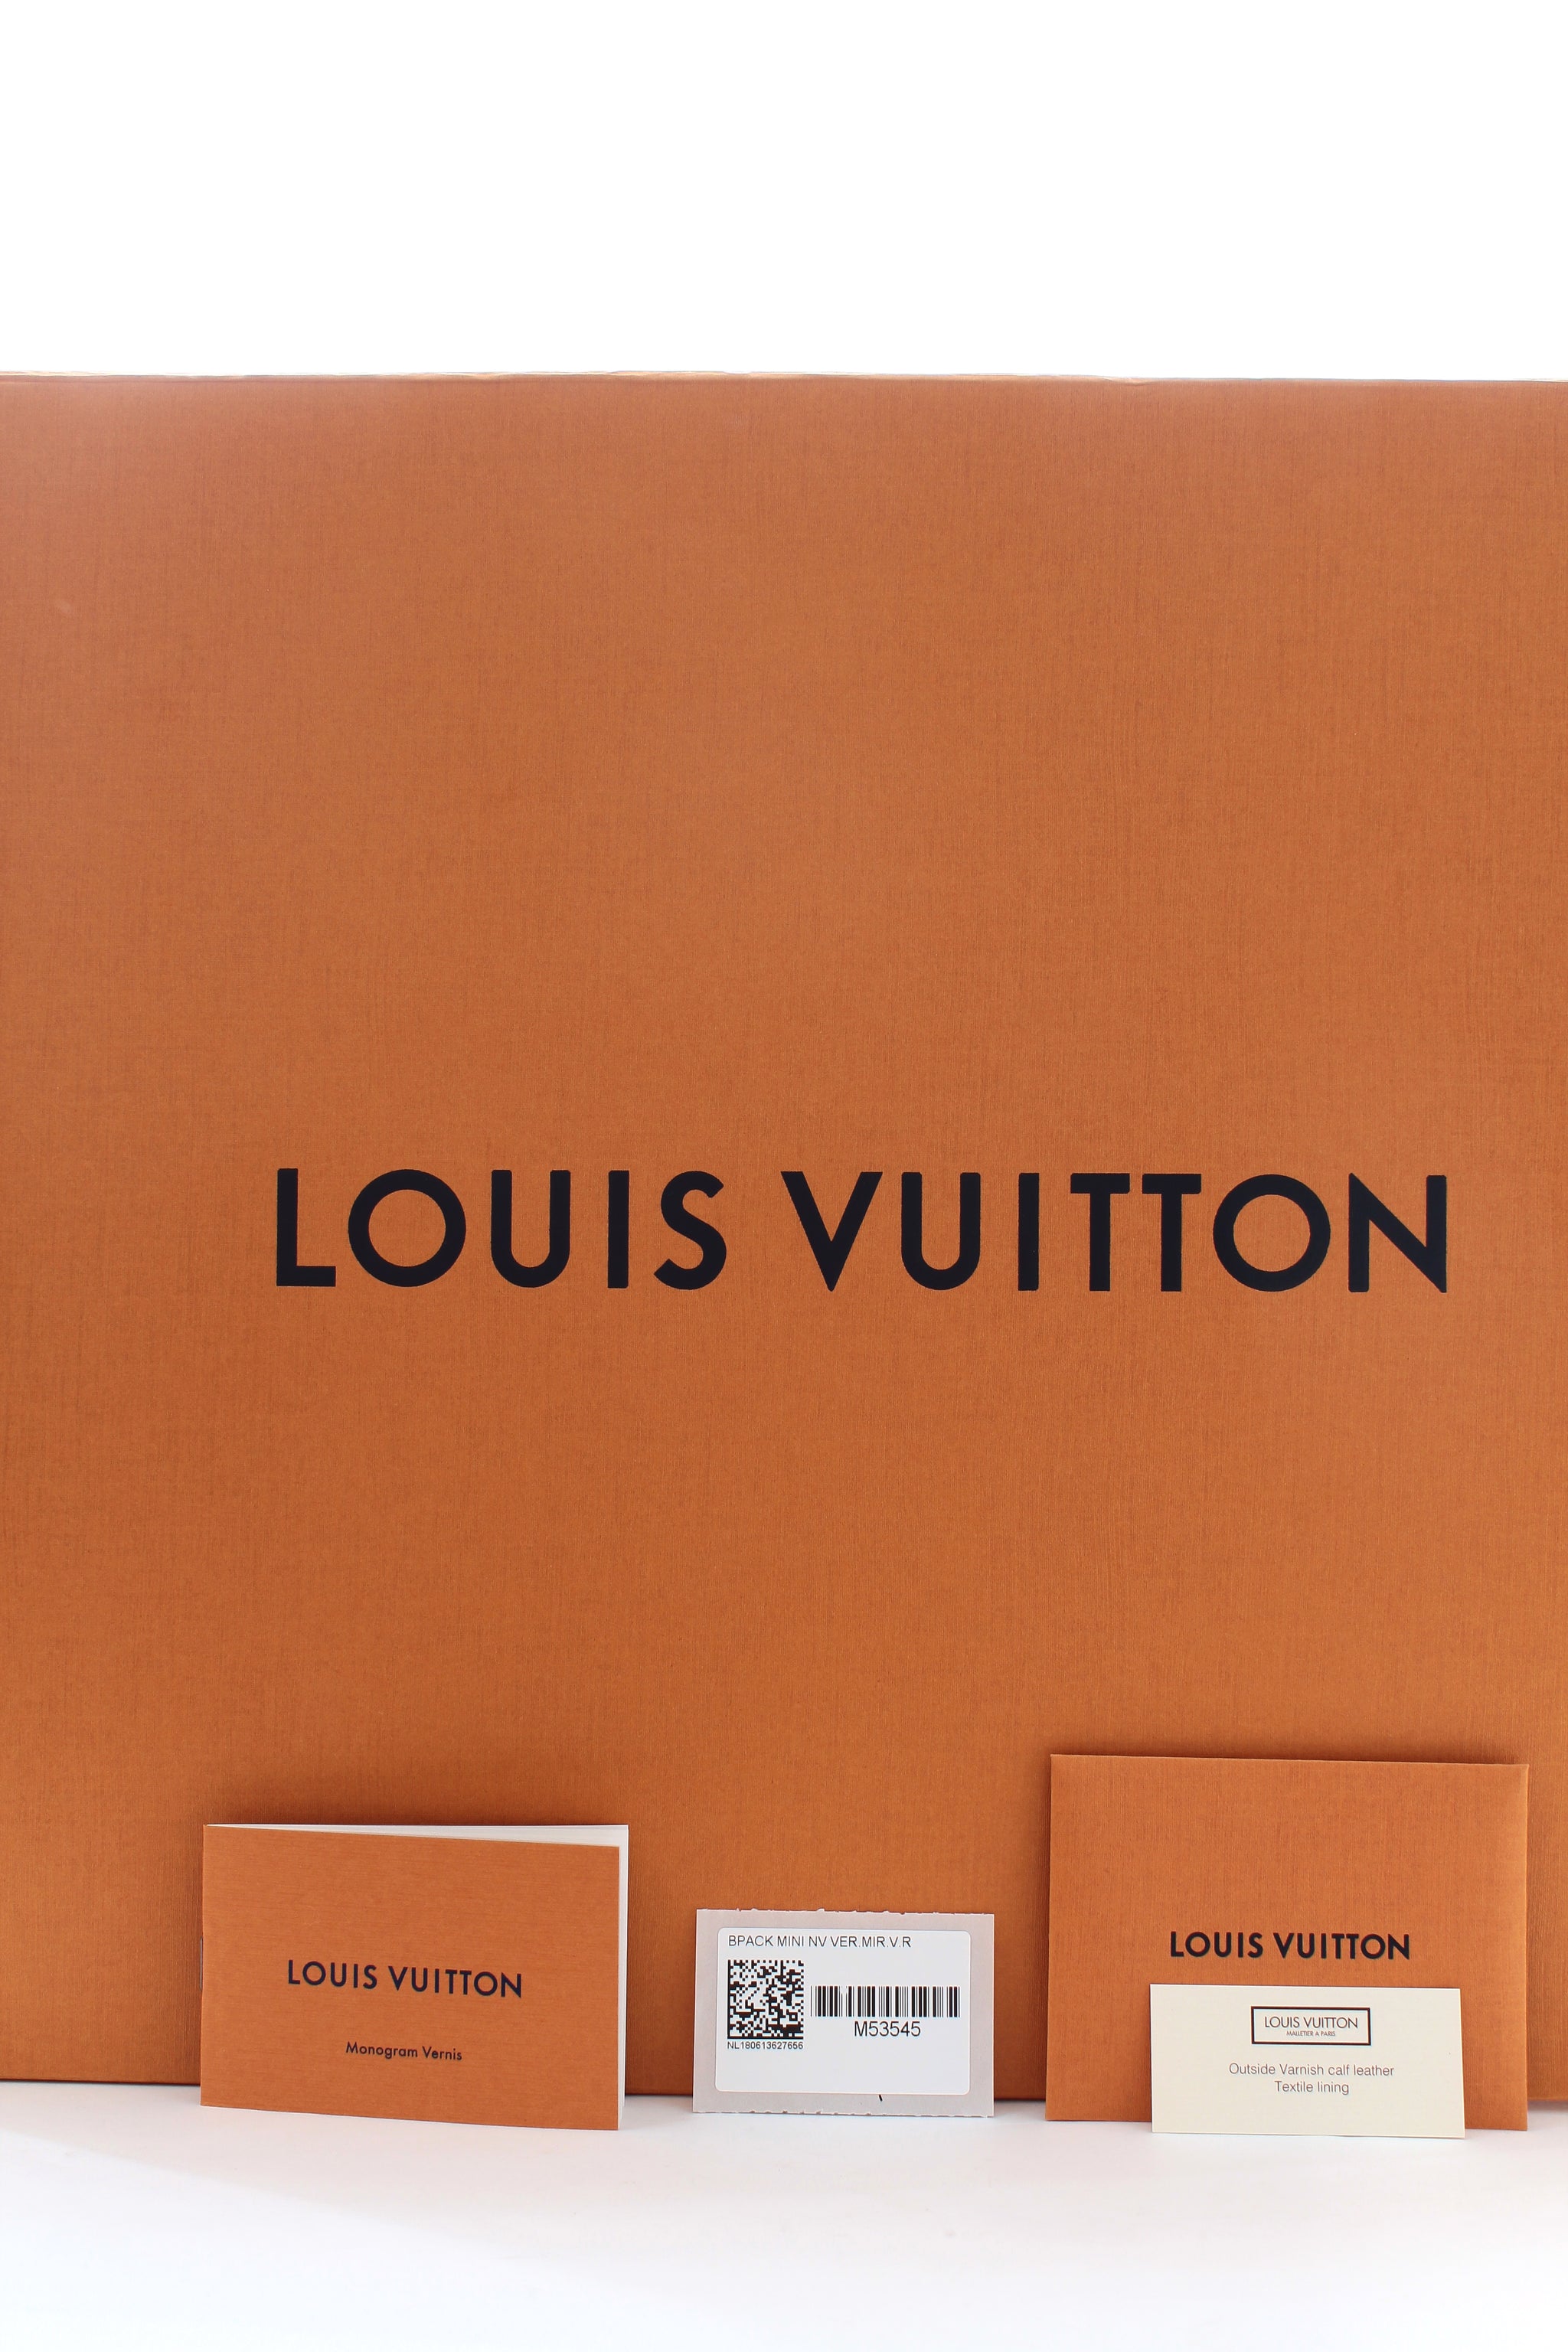 Louis Vuitton Hot Springs Backpack – Pursekelly – high quality